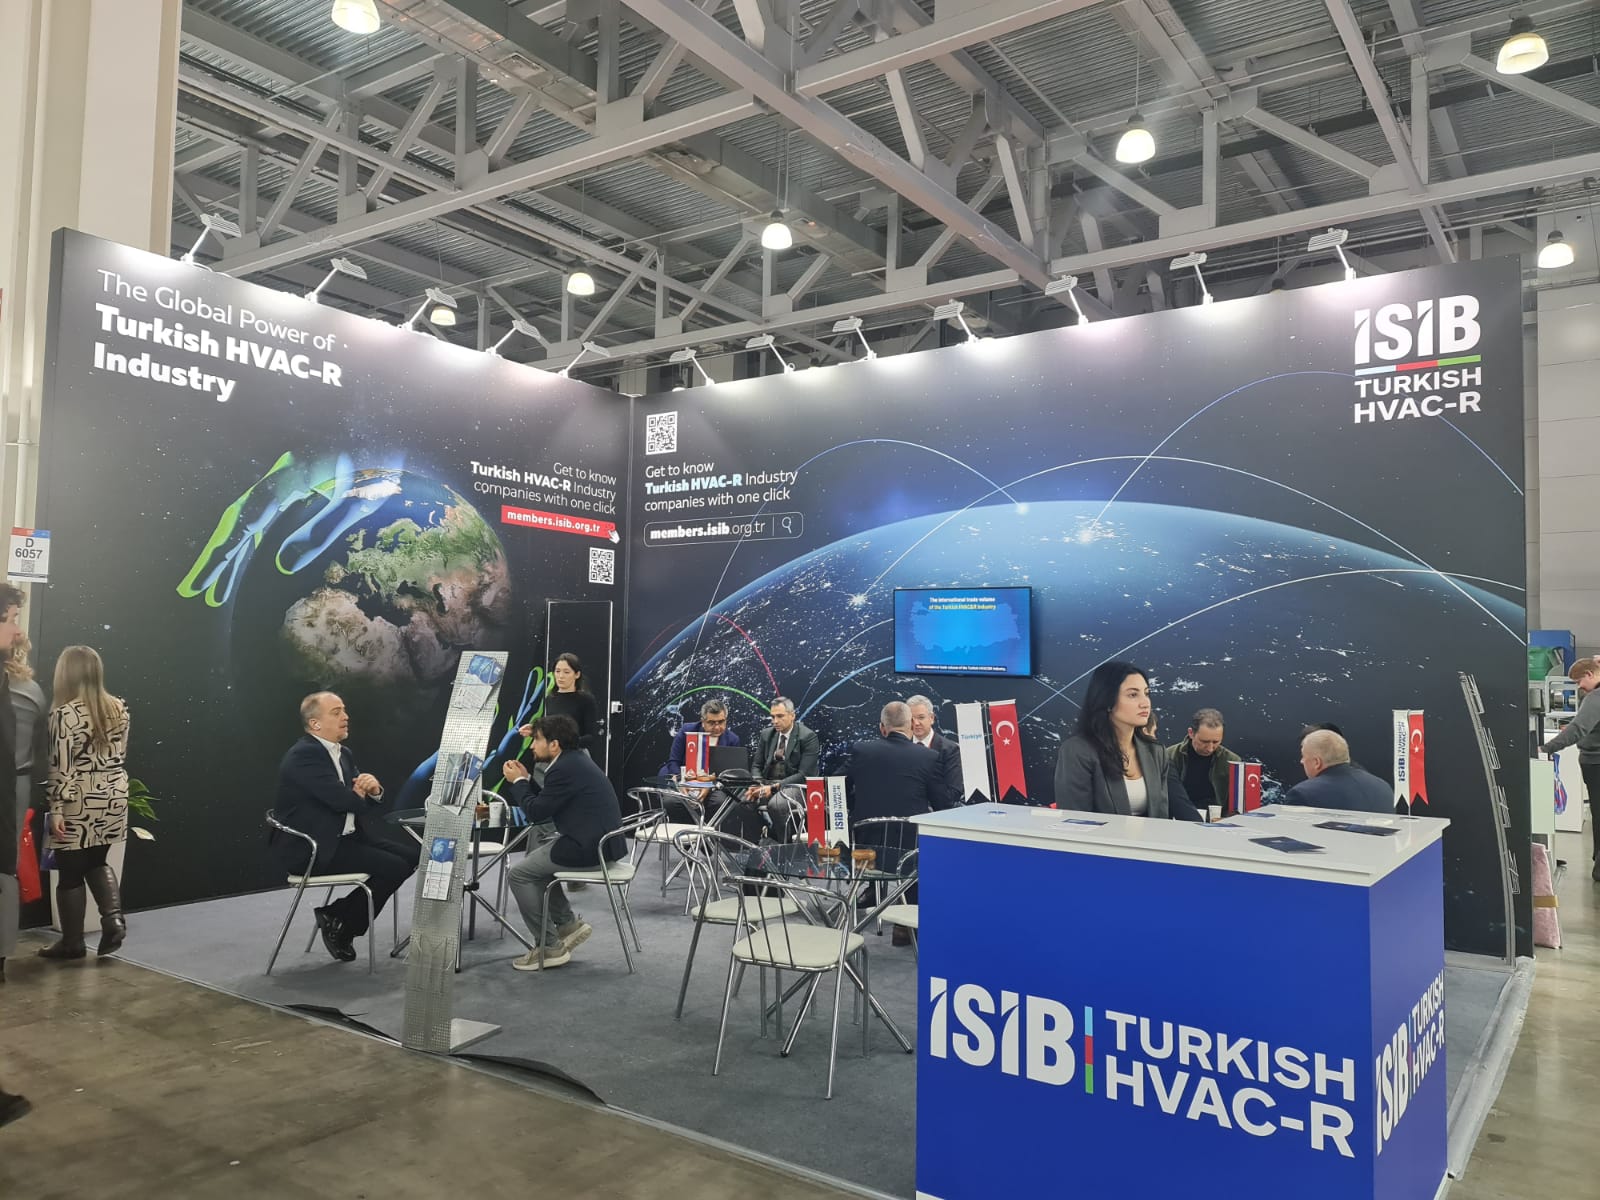 Turkish HVAC-R Industry Participates Significantly in Exhibitions in Russia - 3